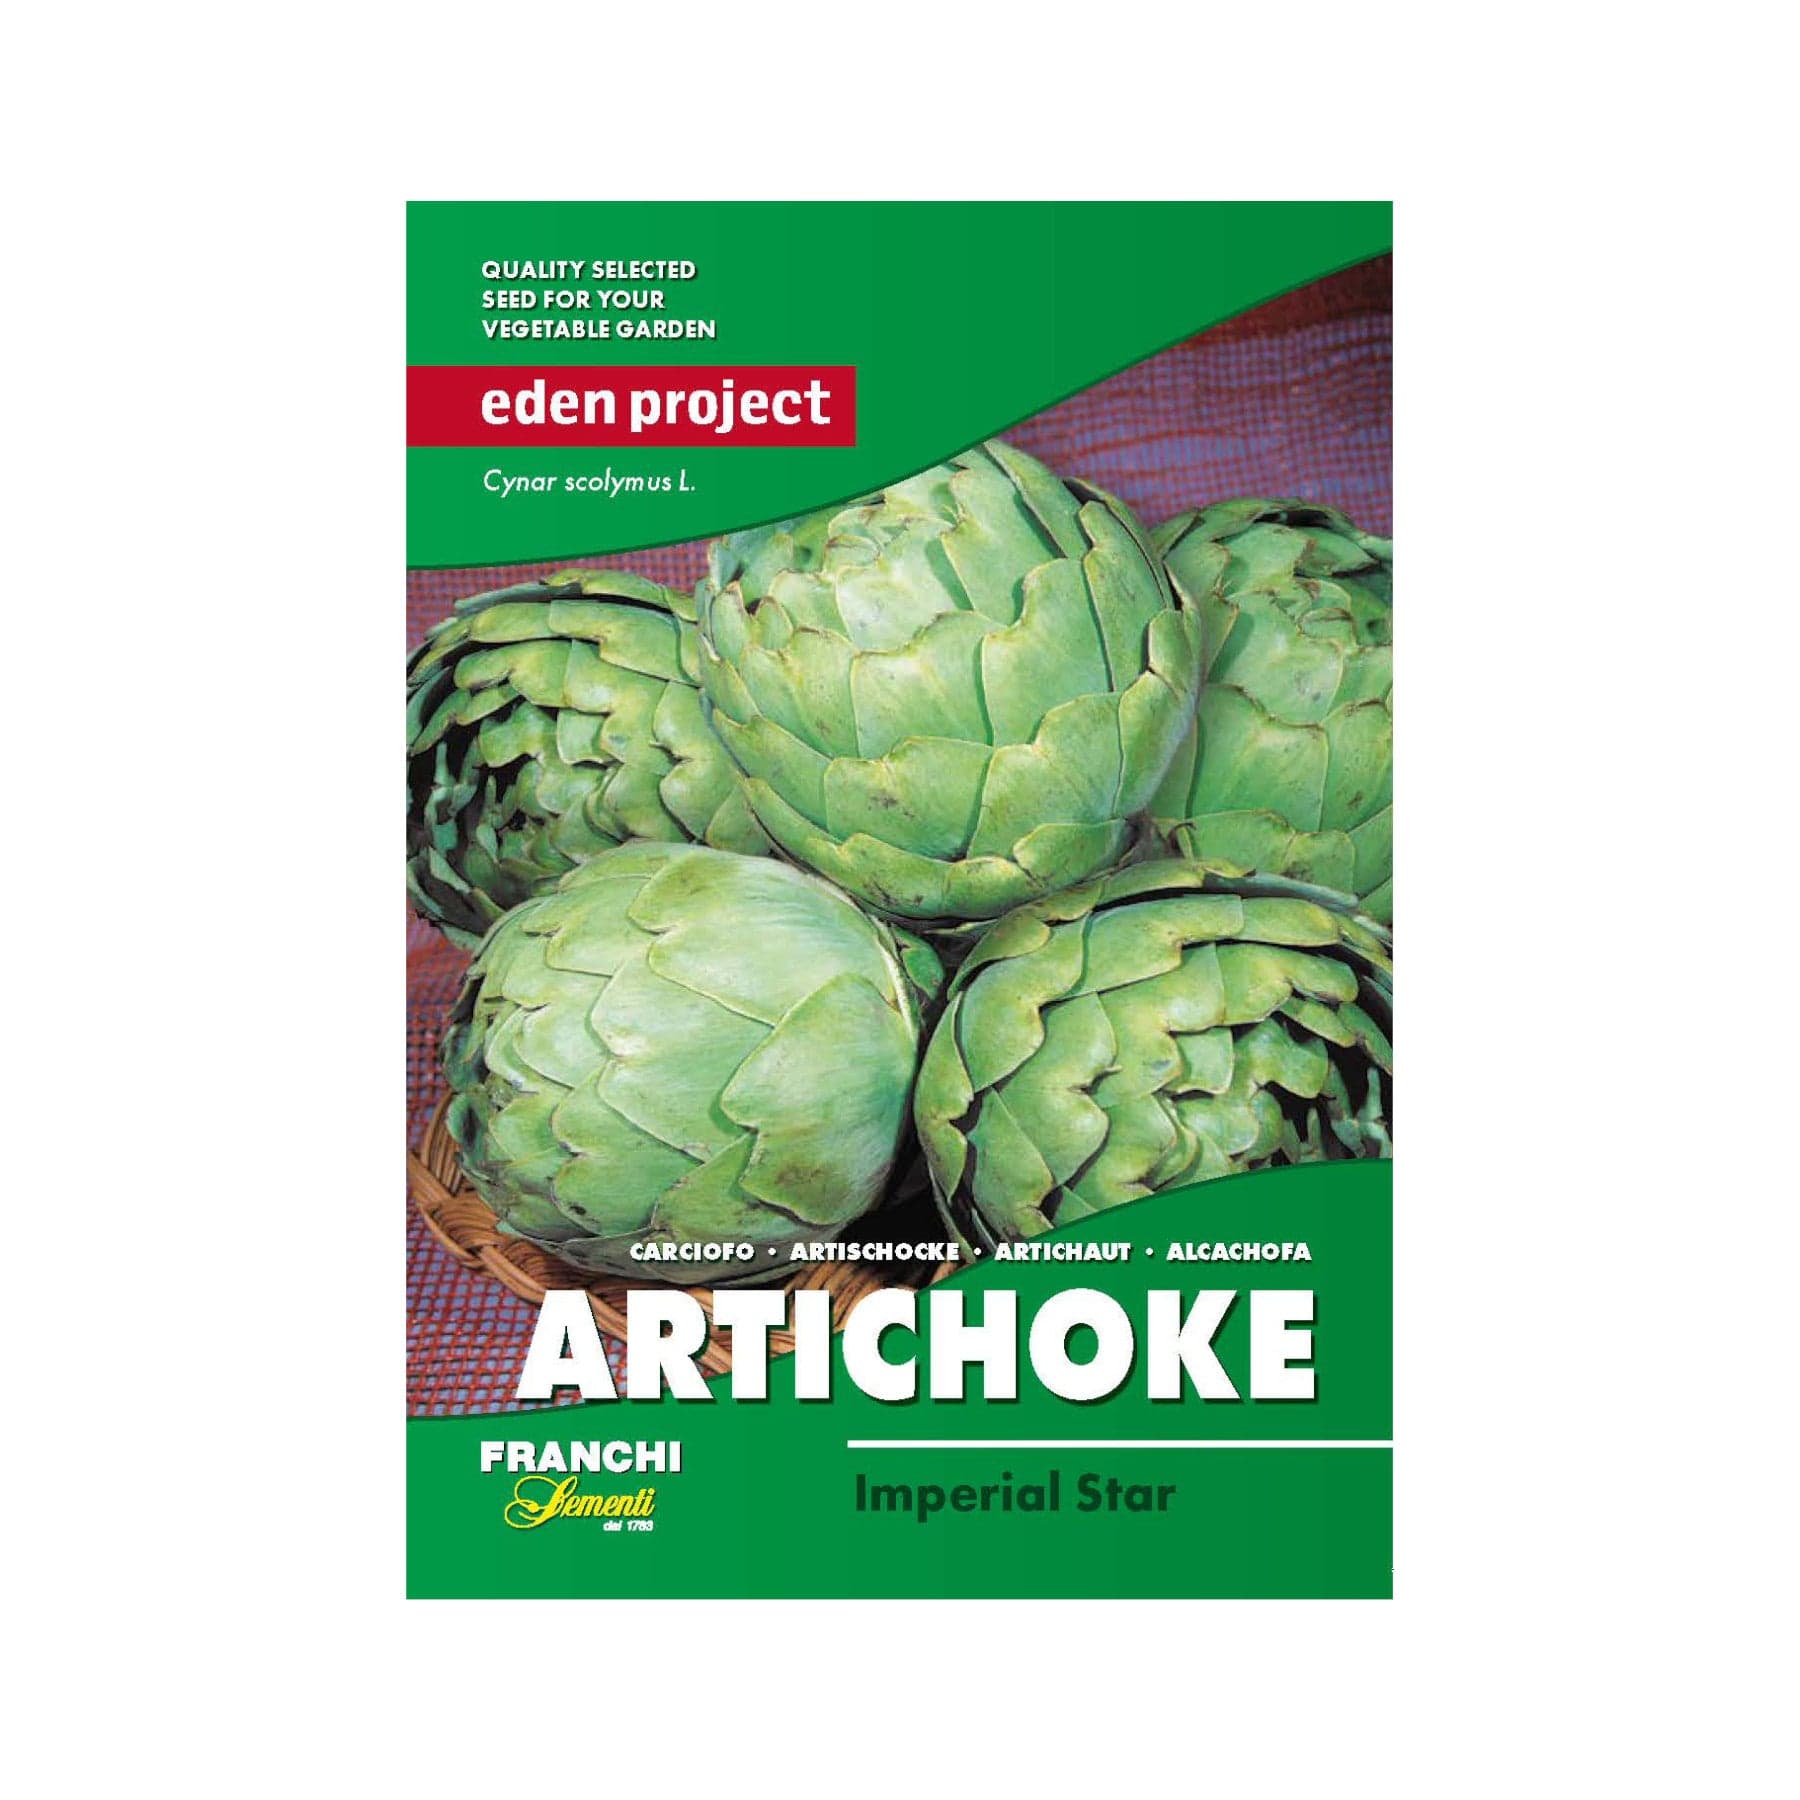 Eden Project artichoke seed packet, Imperial Star variety, Cynara scolymus, quality selected seeds for vegetable garden, Franchi seeds branding.